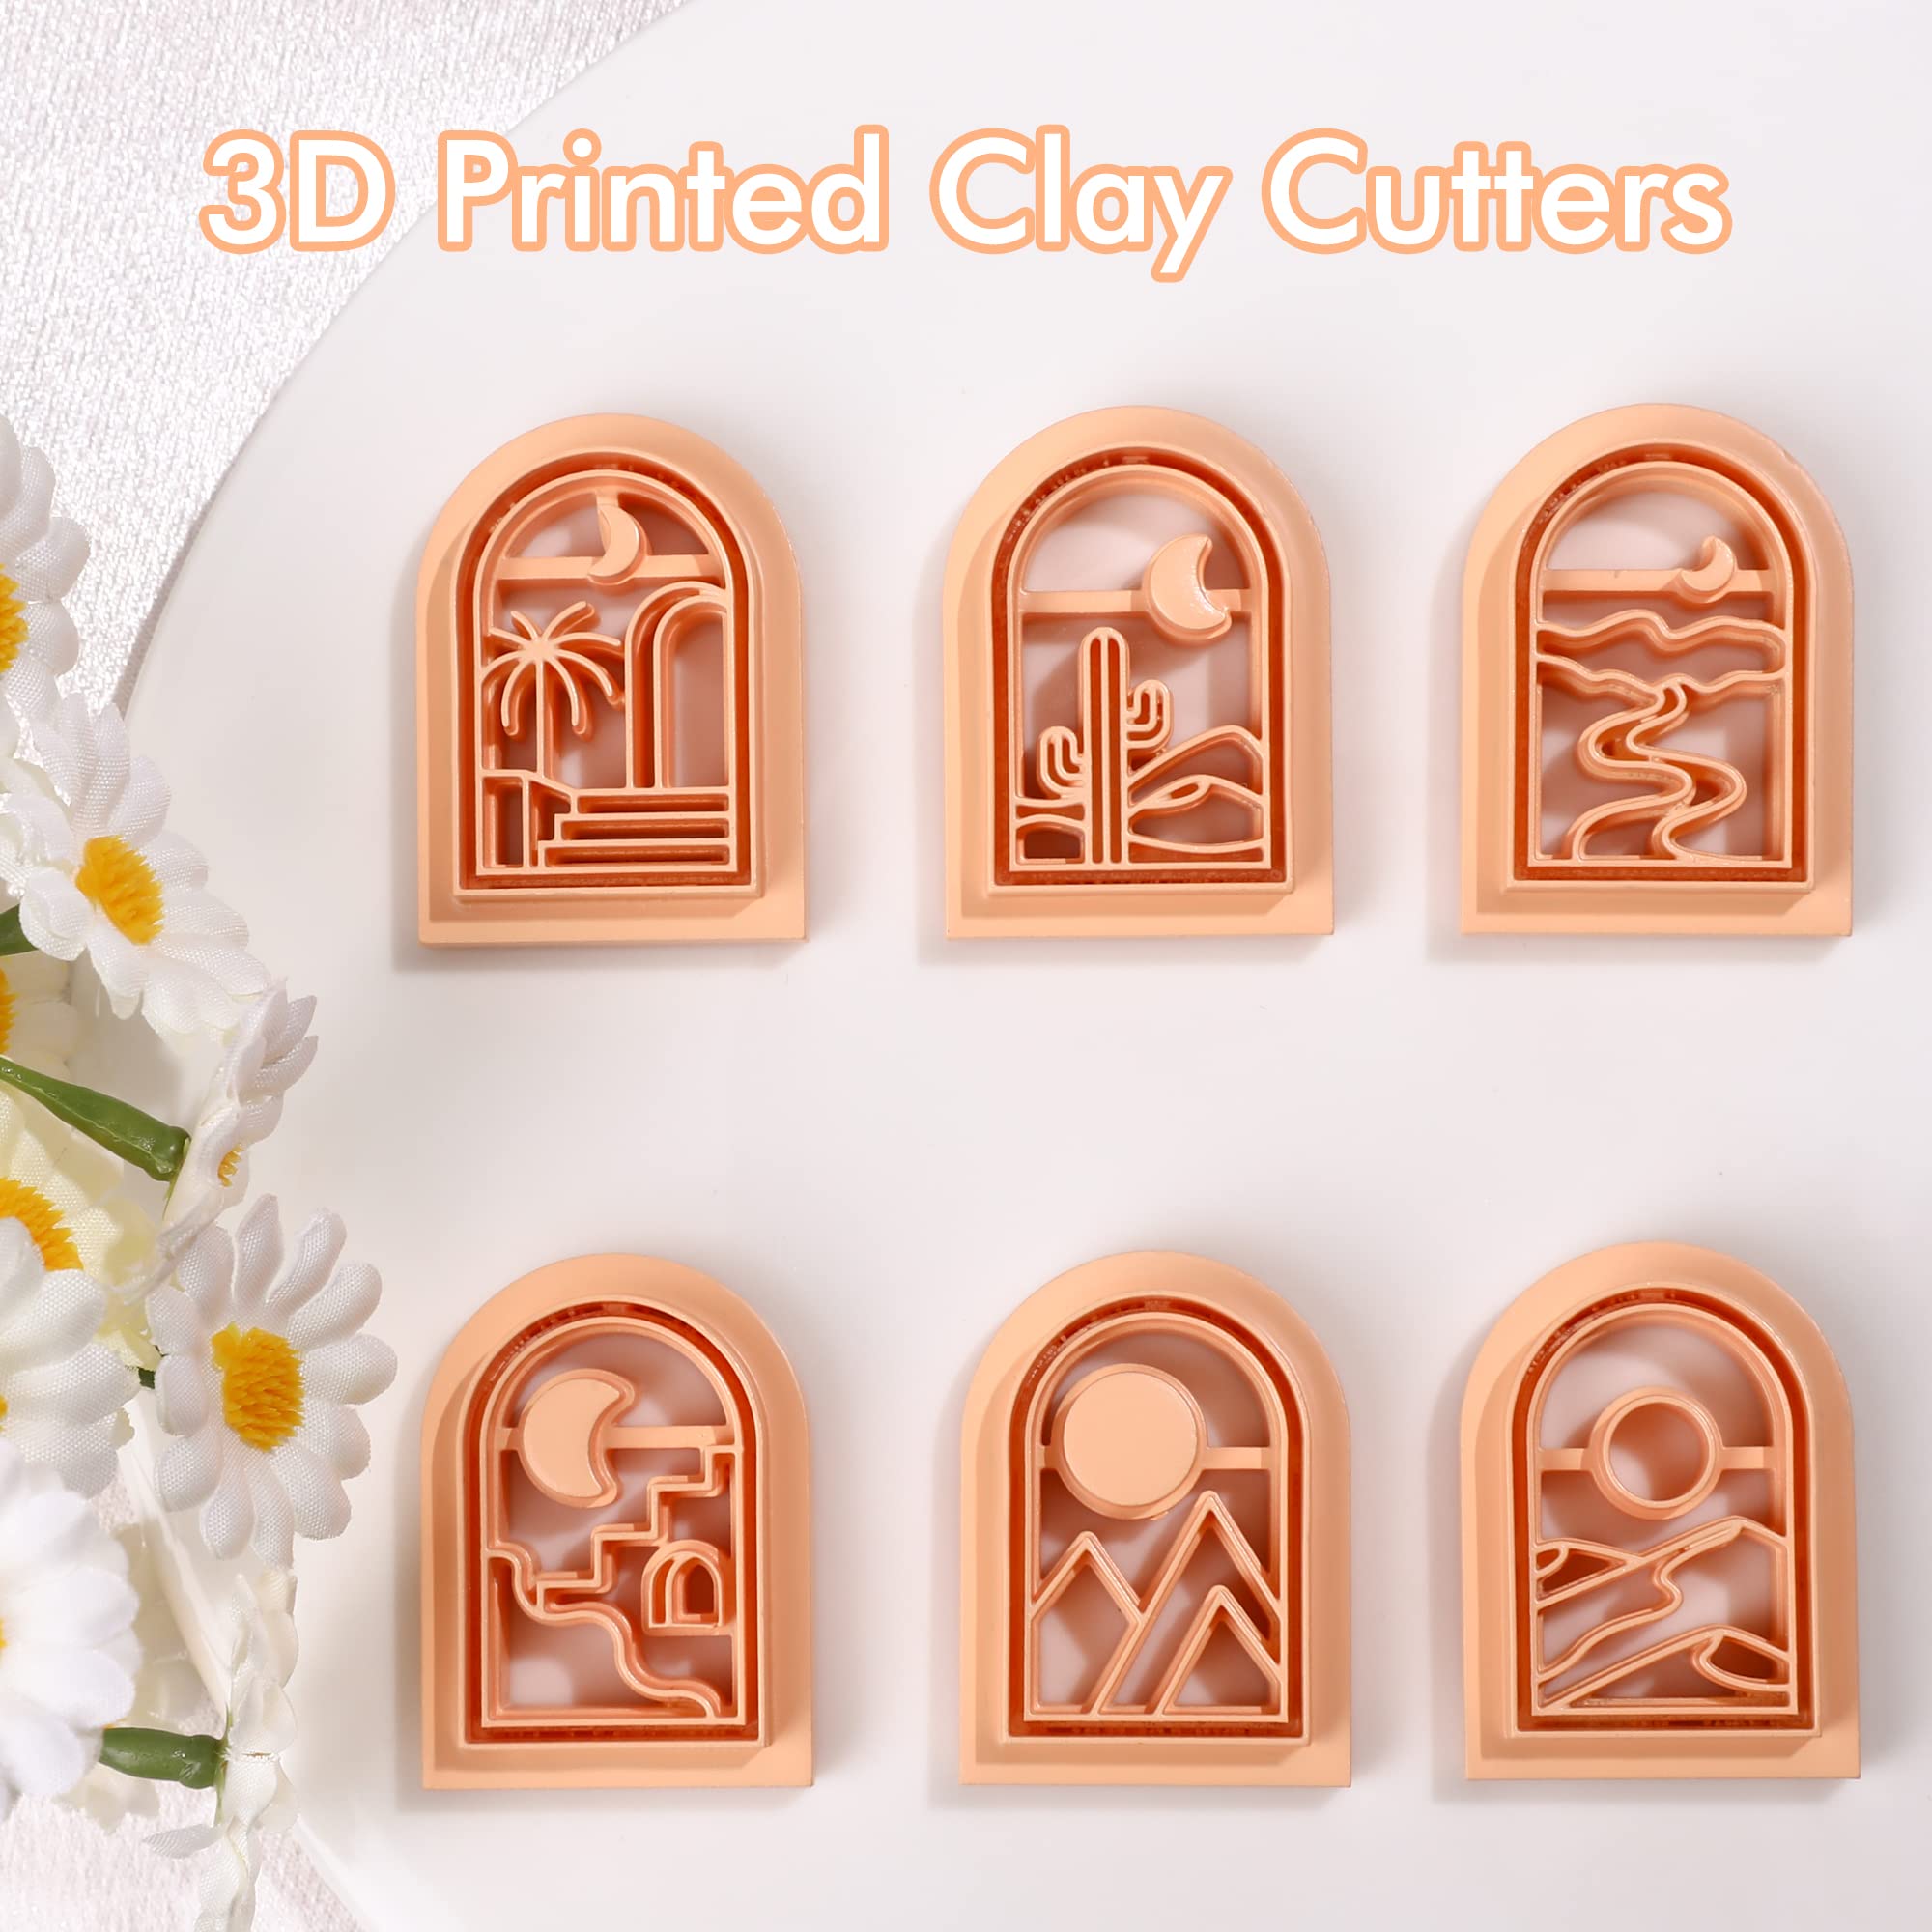 Puocaon Polymer Clay Cutters Embossed Desert Scene Sun Moon Clay Cutters 6 Pcs